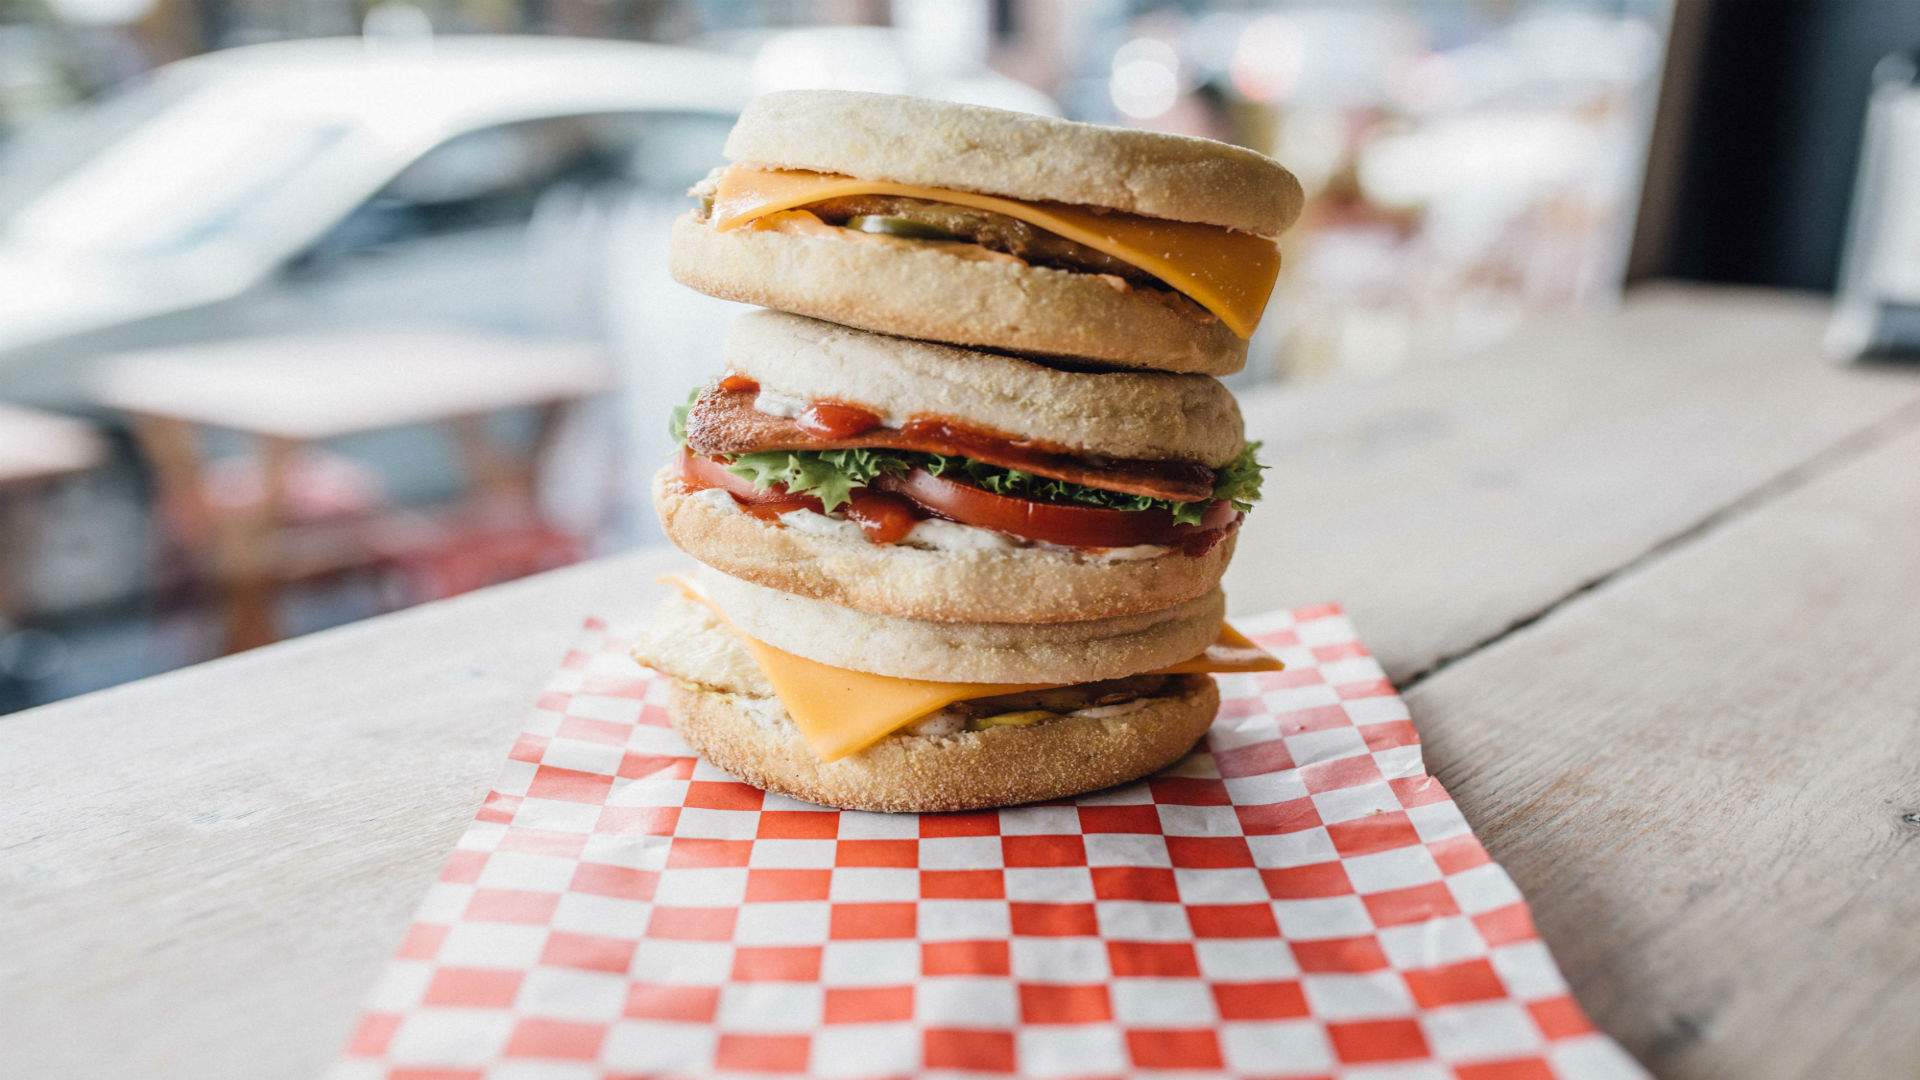 Lord of the Fries Has Launched an All-Day Breakfast Menu of Vegan Hangover Dreams